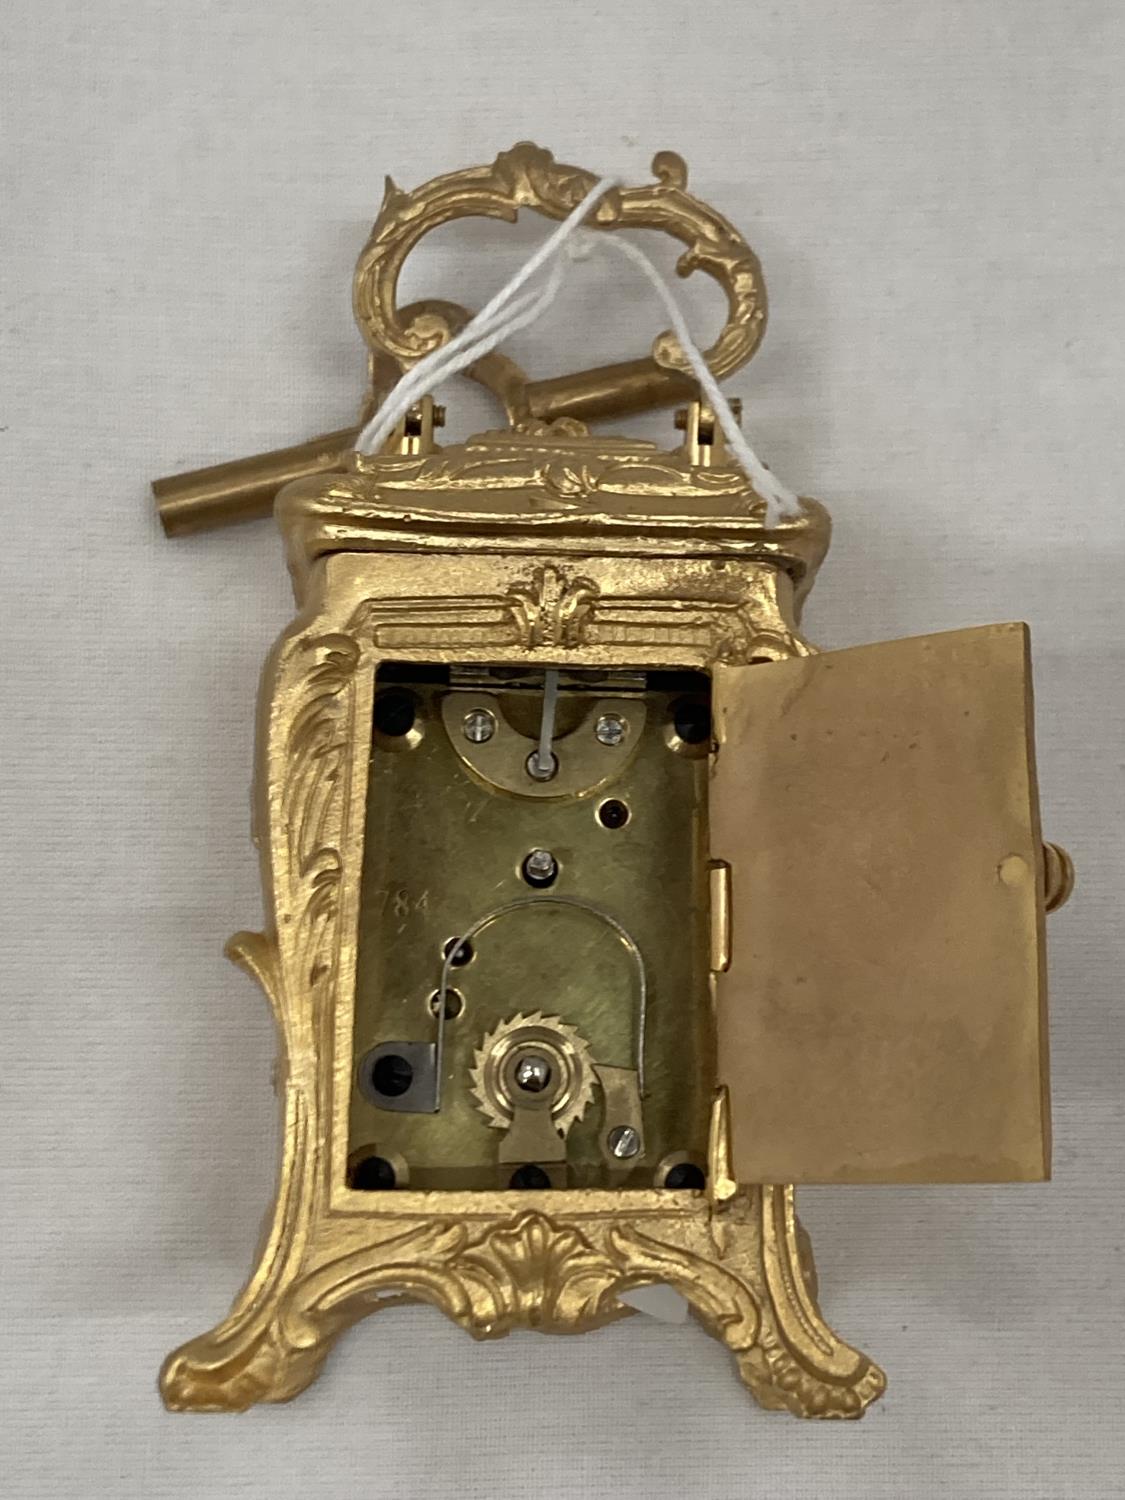 A MINIATURE GILDED FRENCH CLOCK WITH KEY HEIGHT 3.5" SEEN WORKING BUT NO WARRANTY - Image 4 of 6